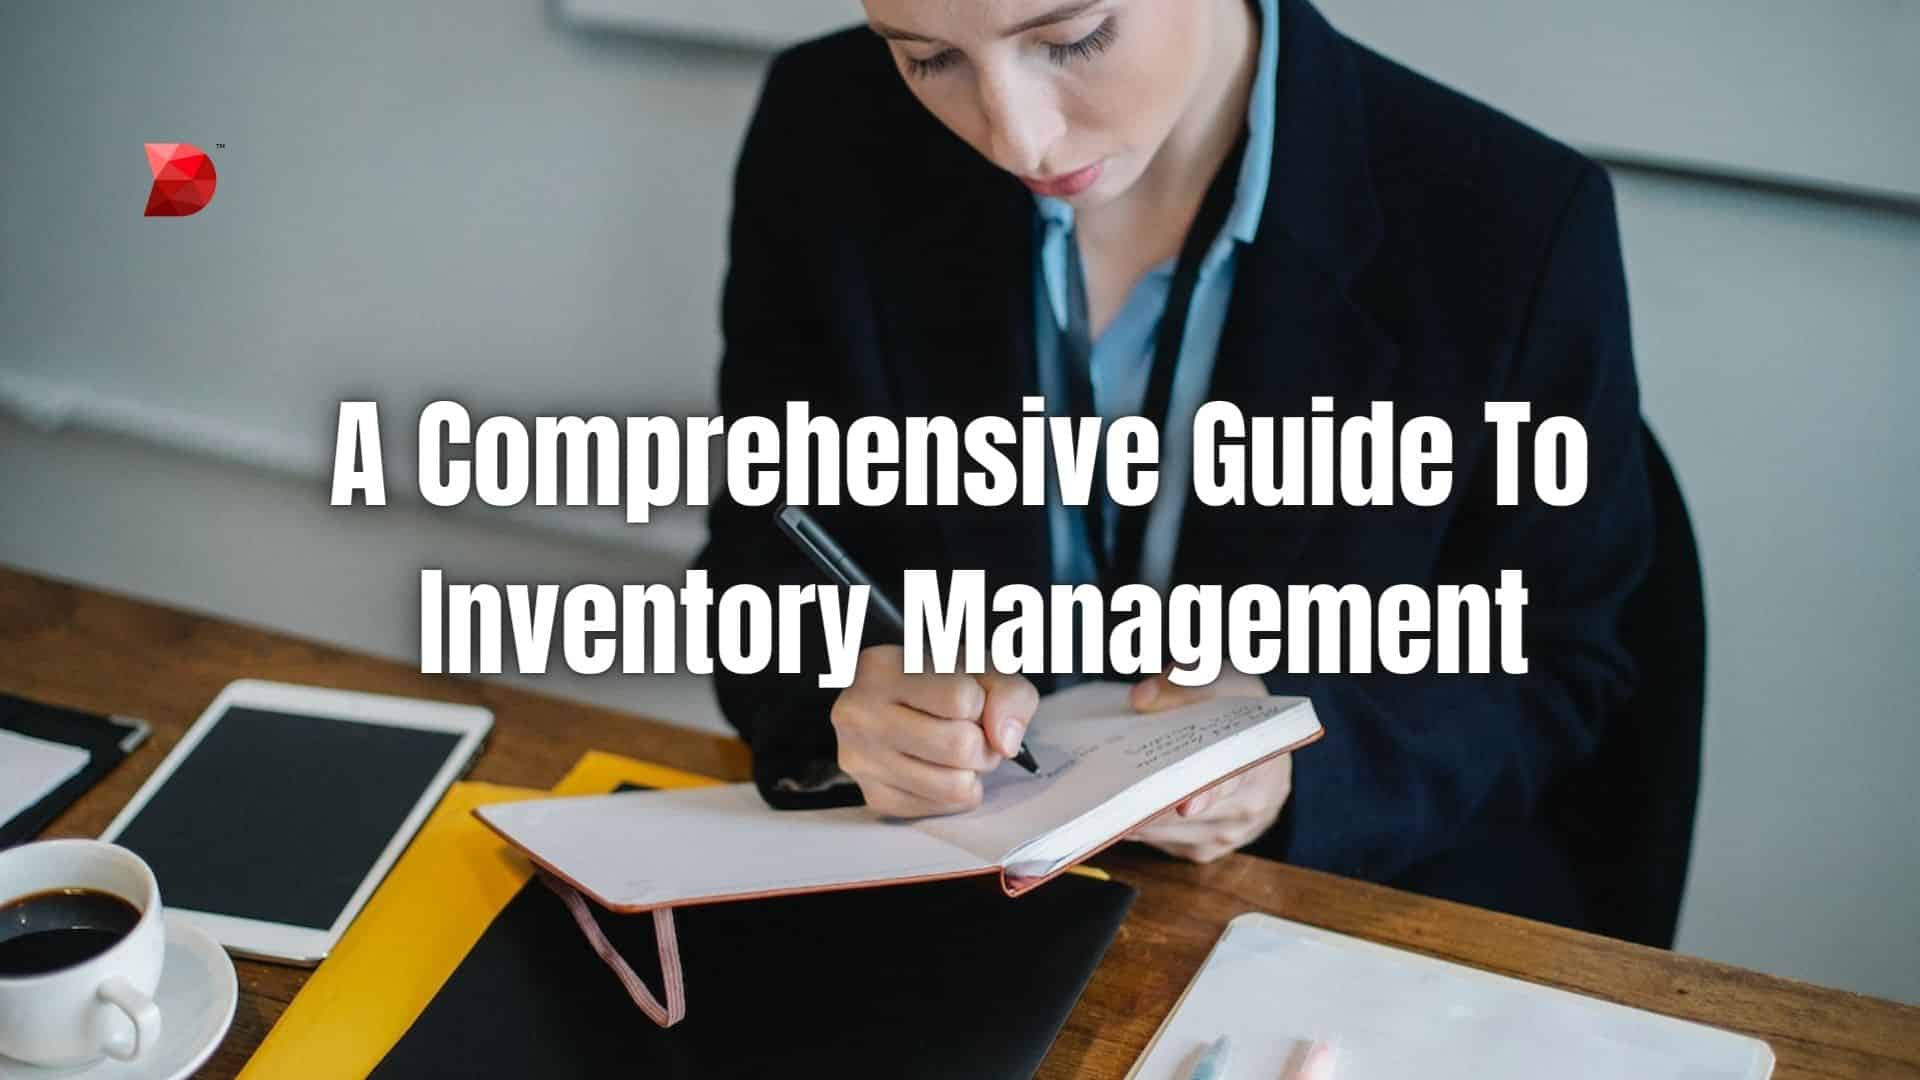 A Comprehensive Guide To Inventory Management